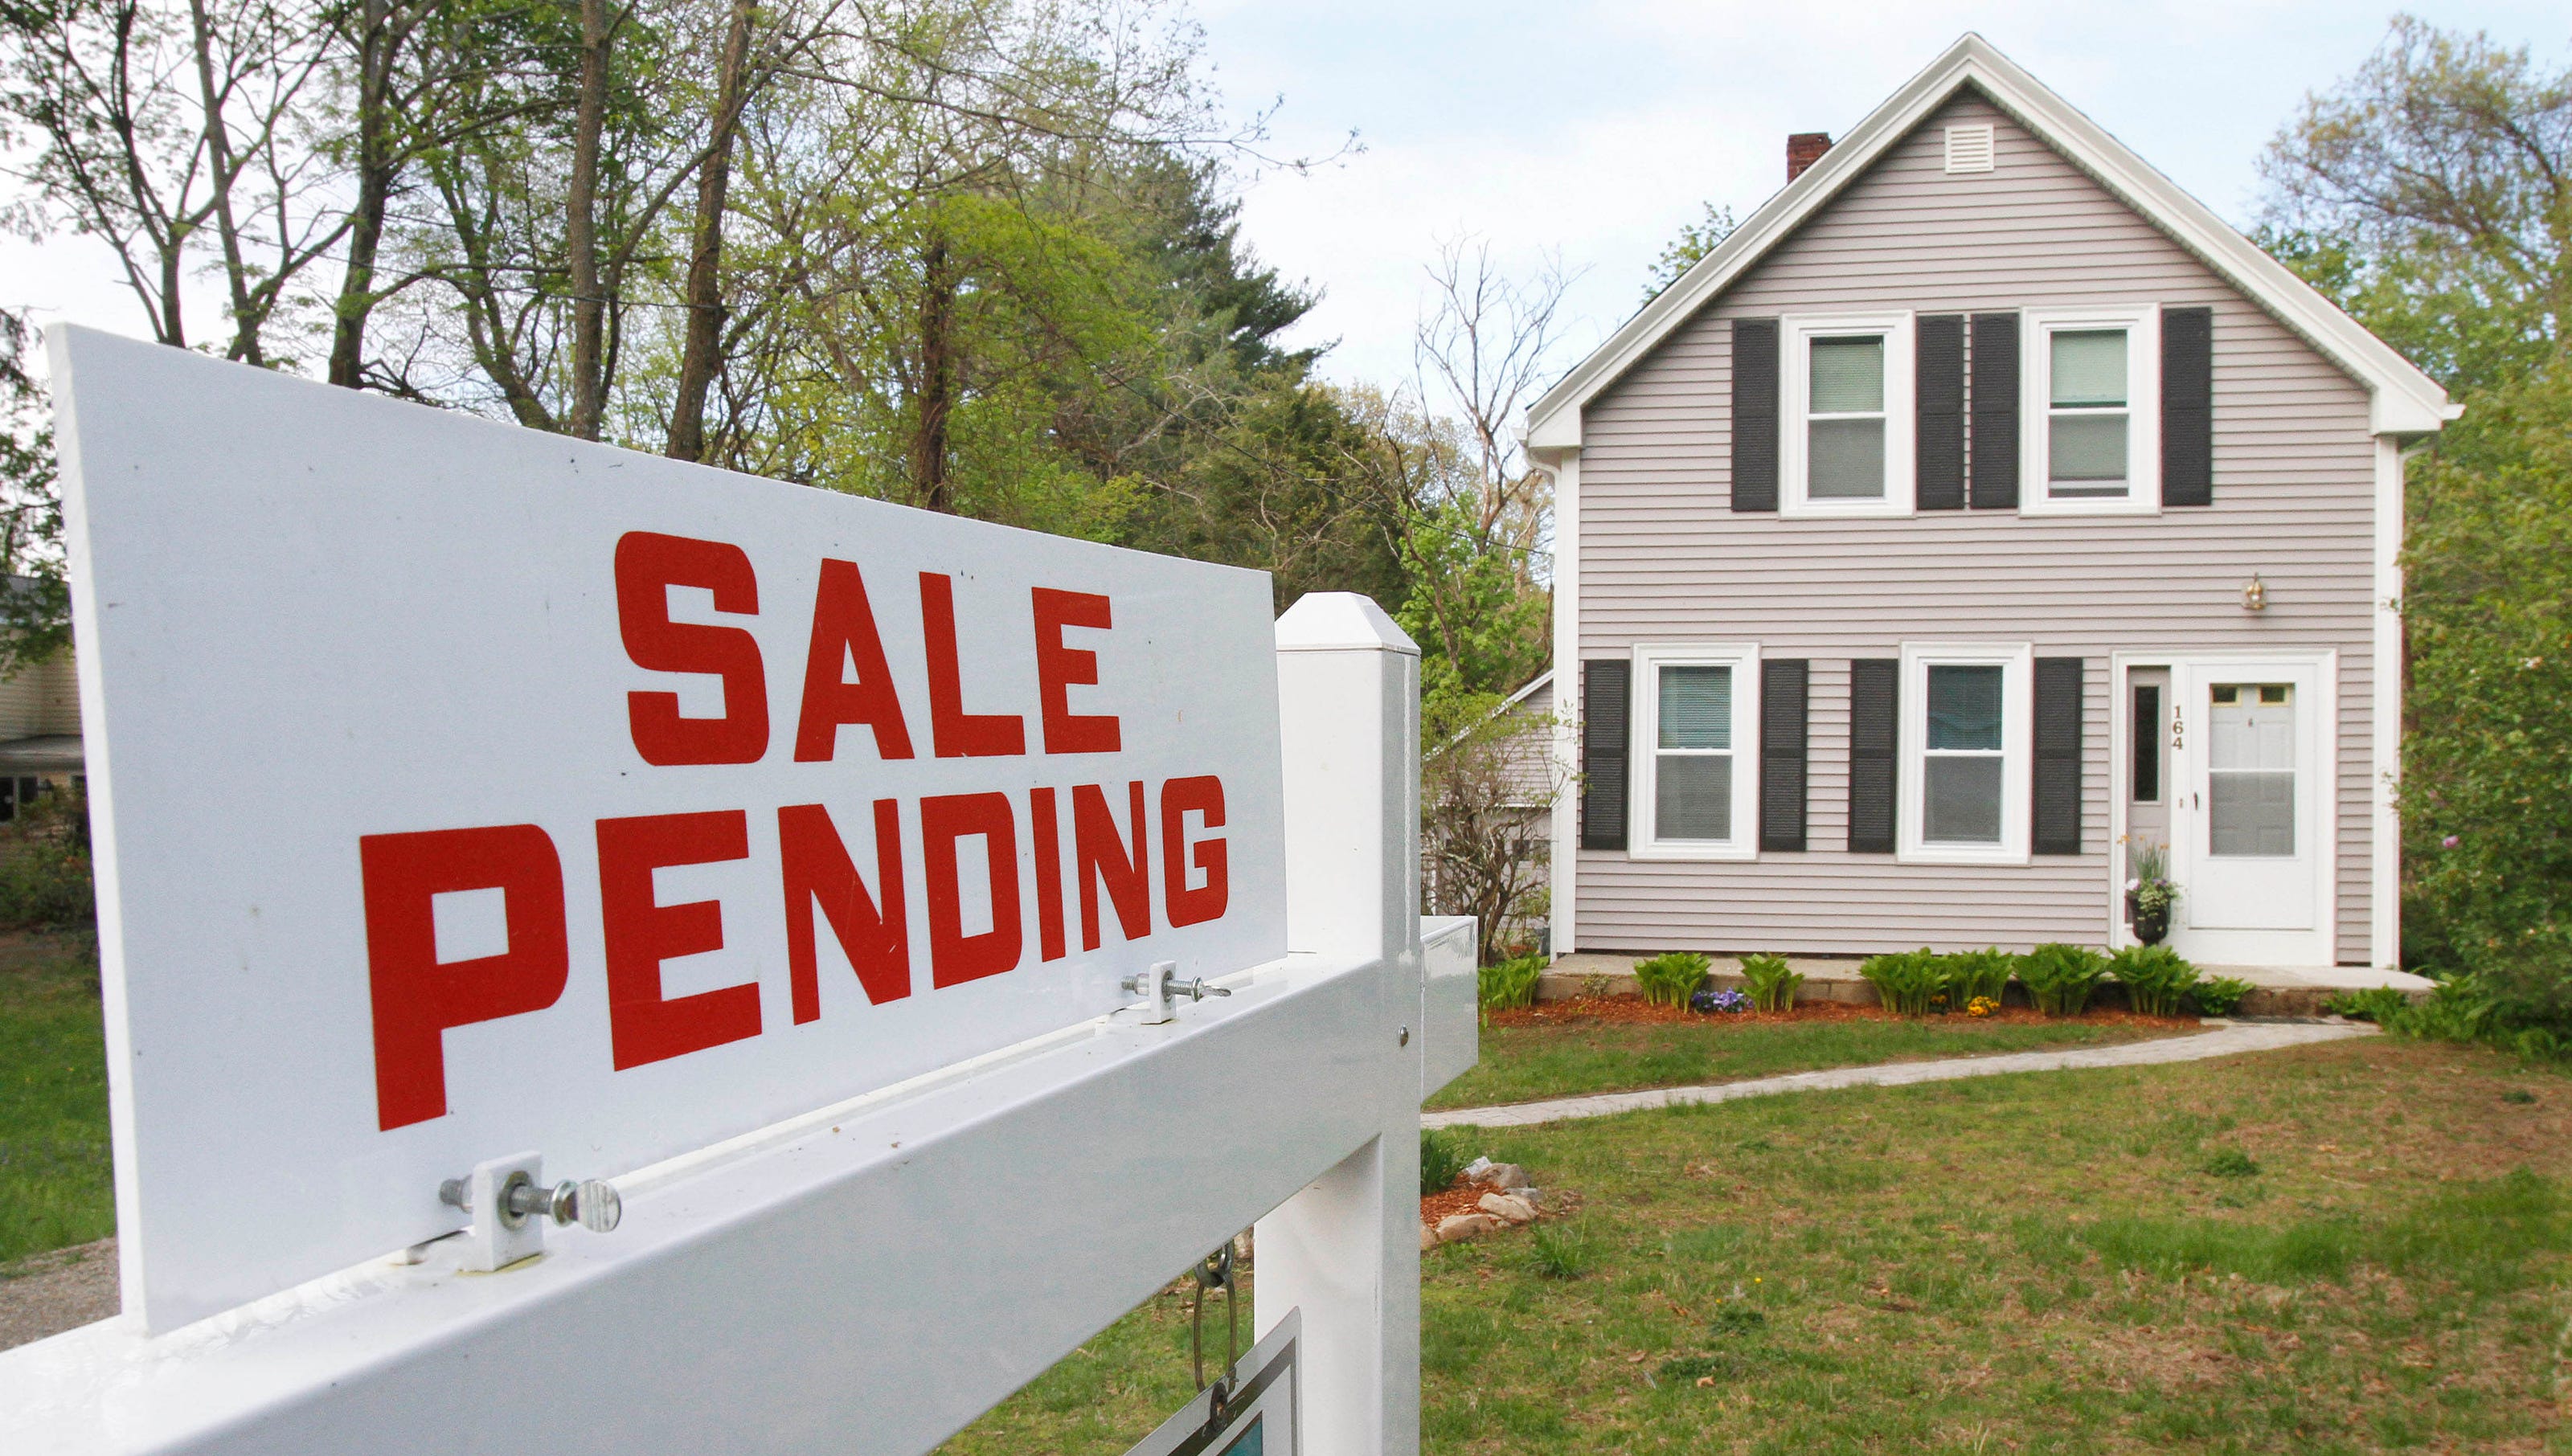  Cincinnati metro area home prices bounce back to all-time high 